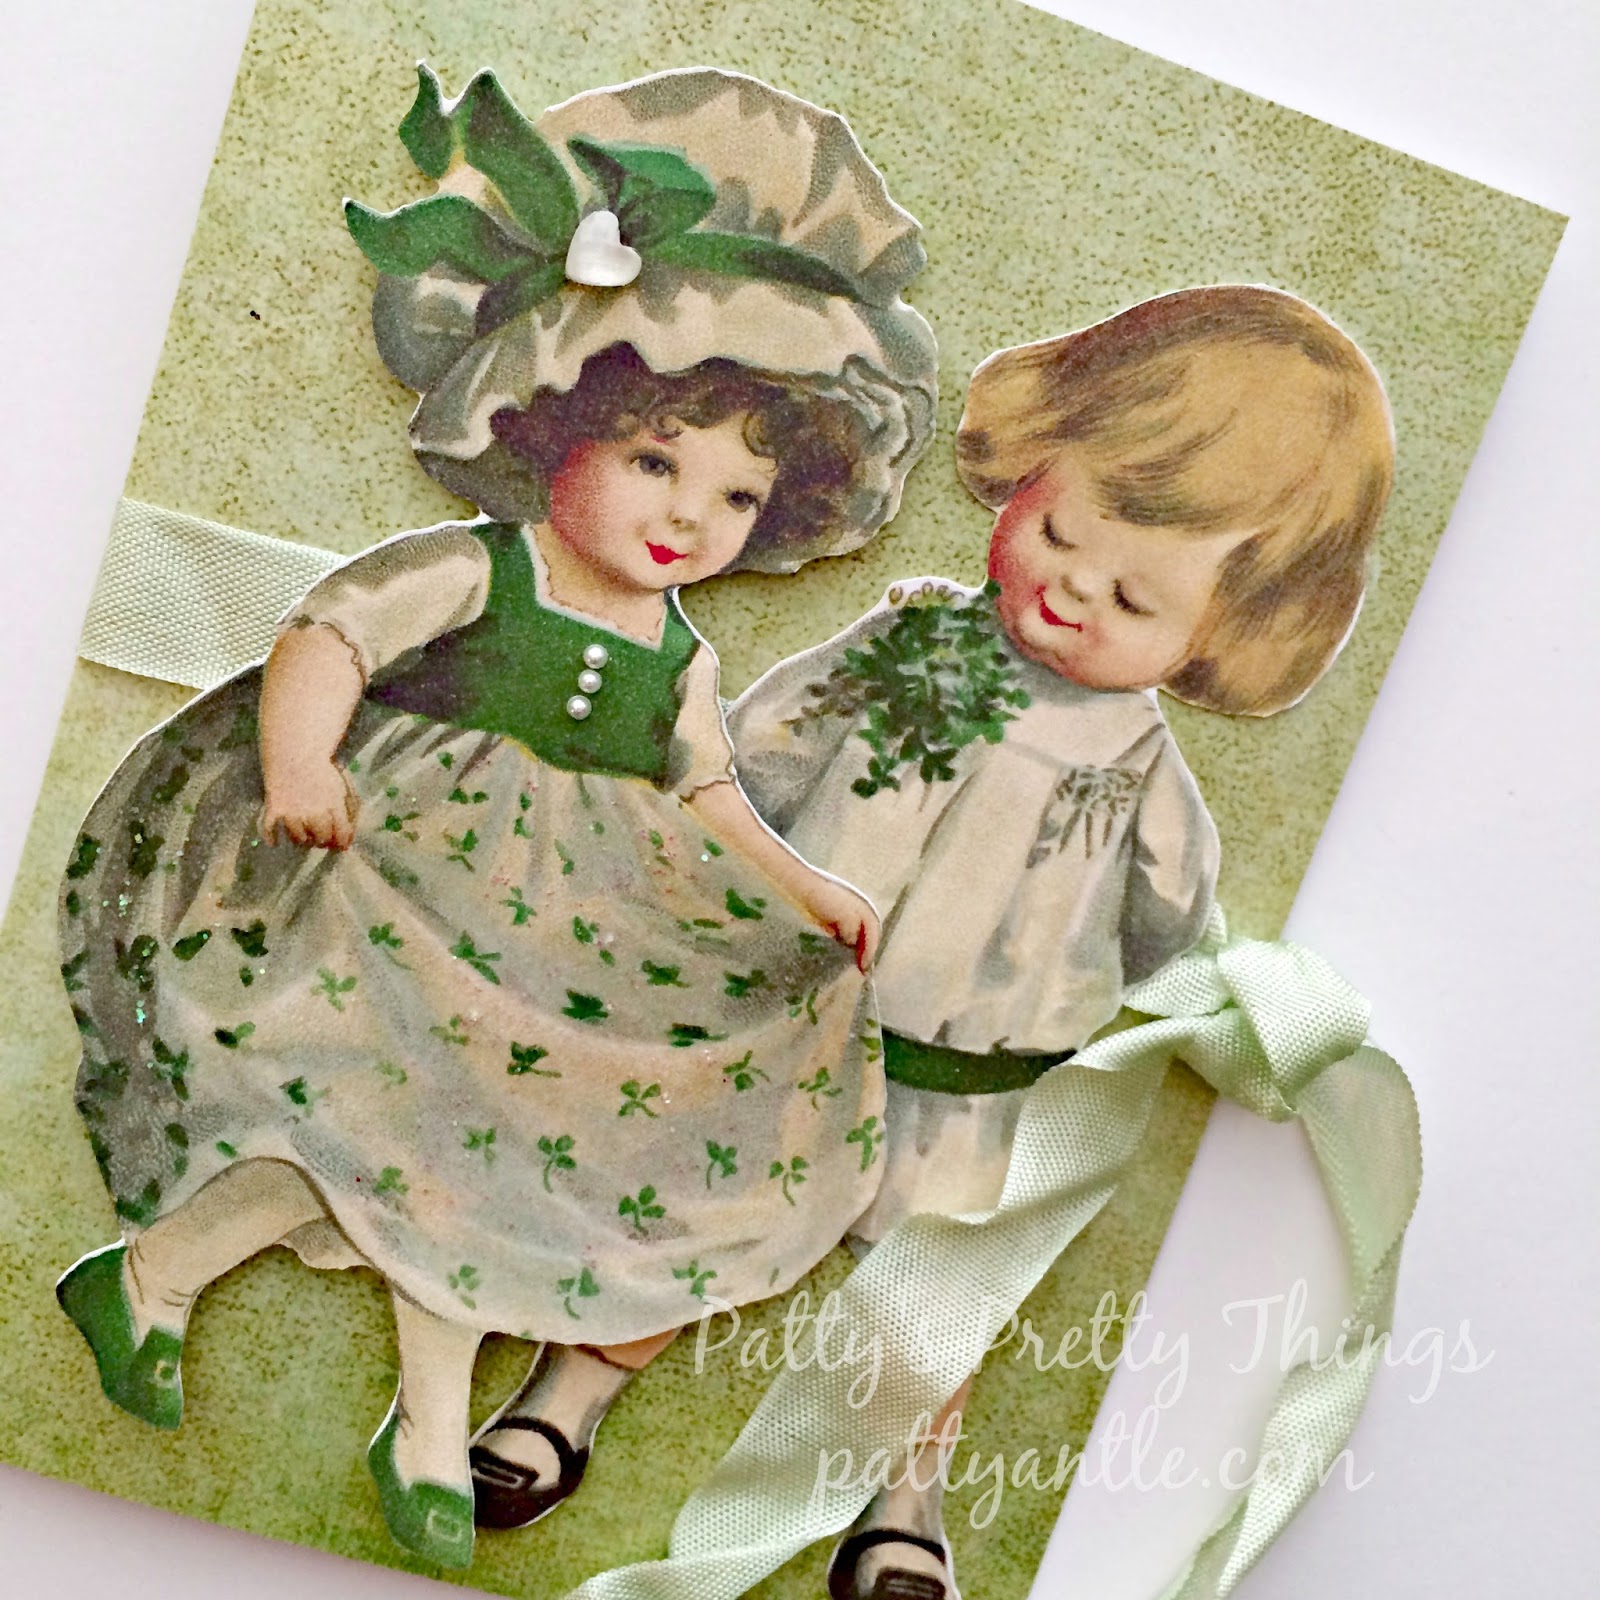 Patty Antle's Prettys: Cards & Journals